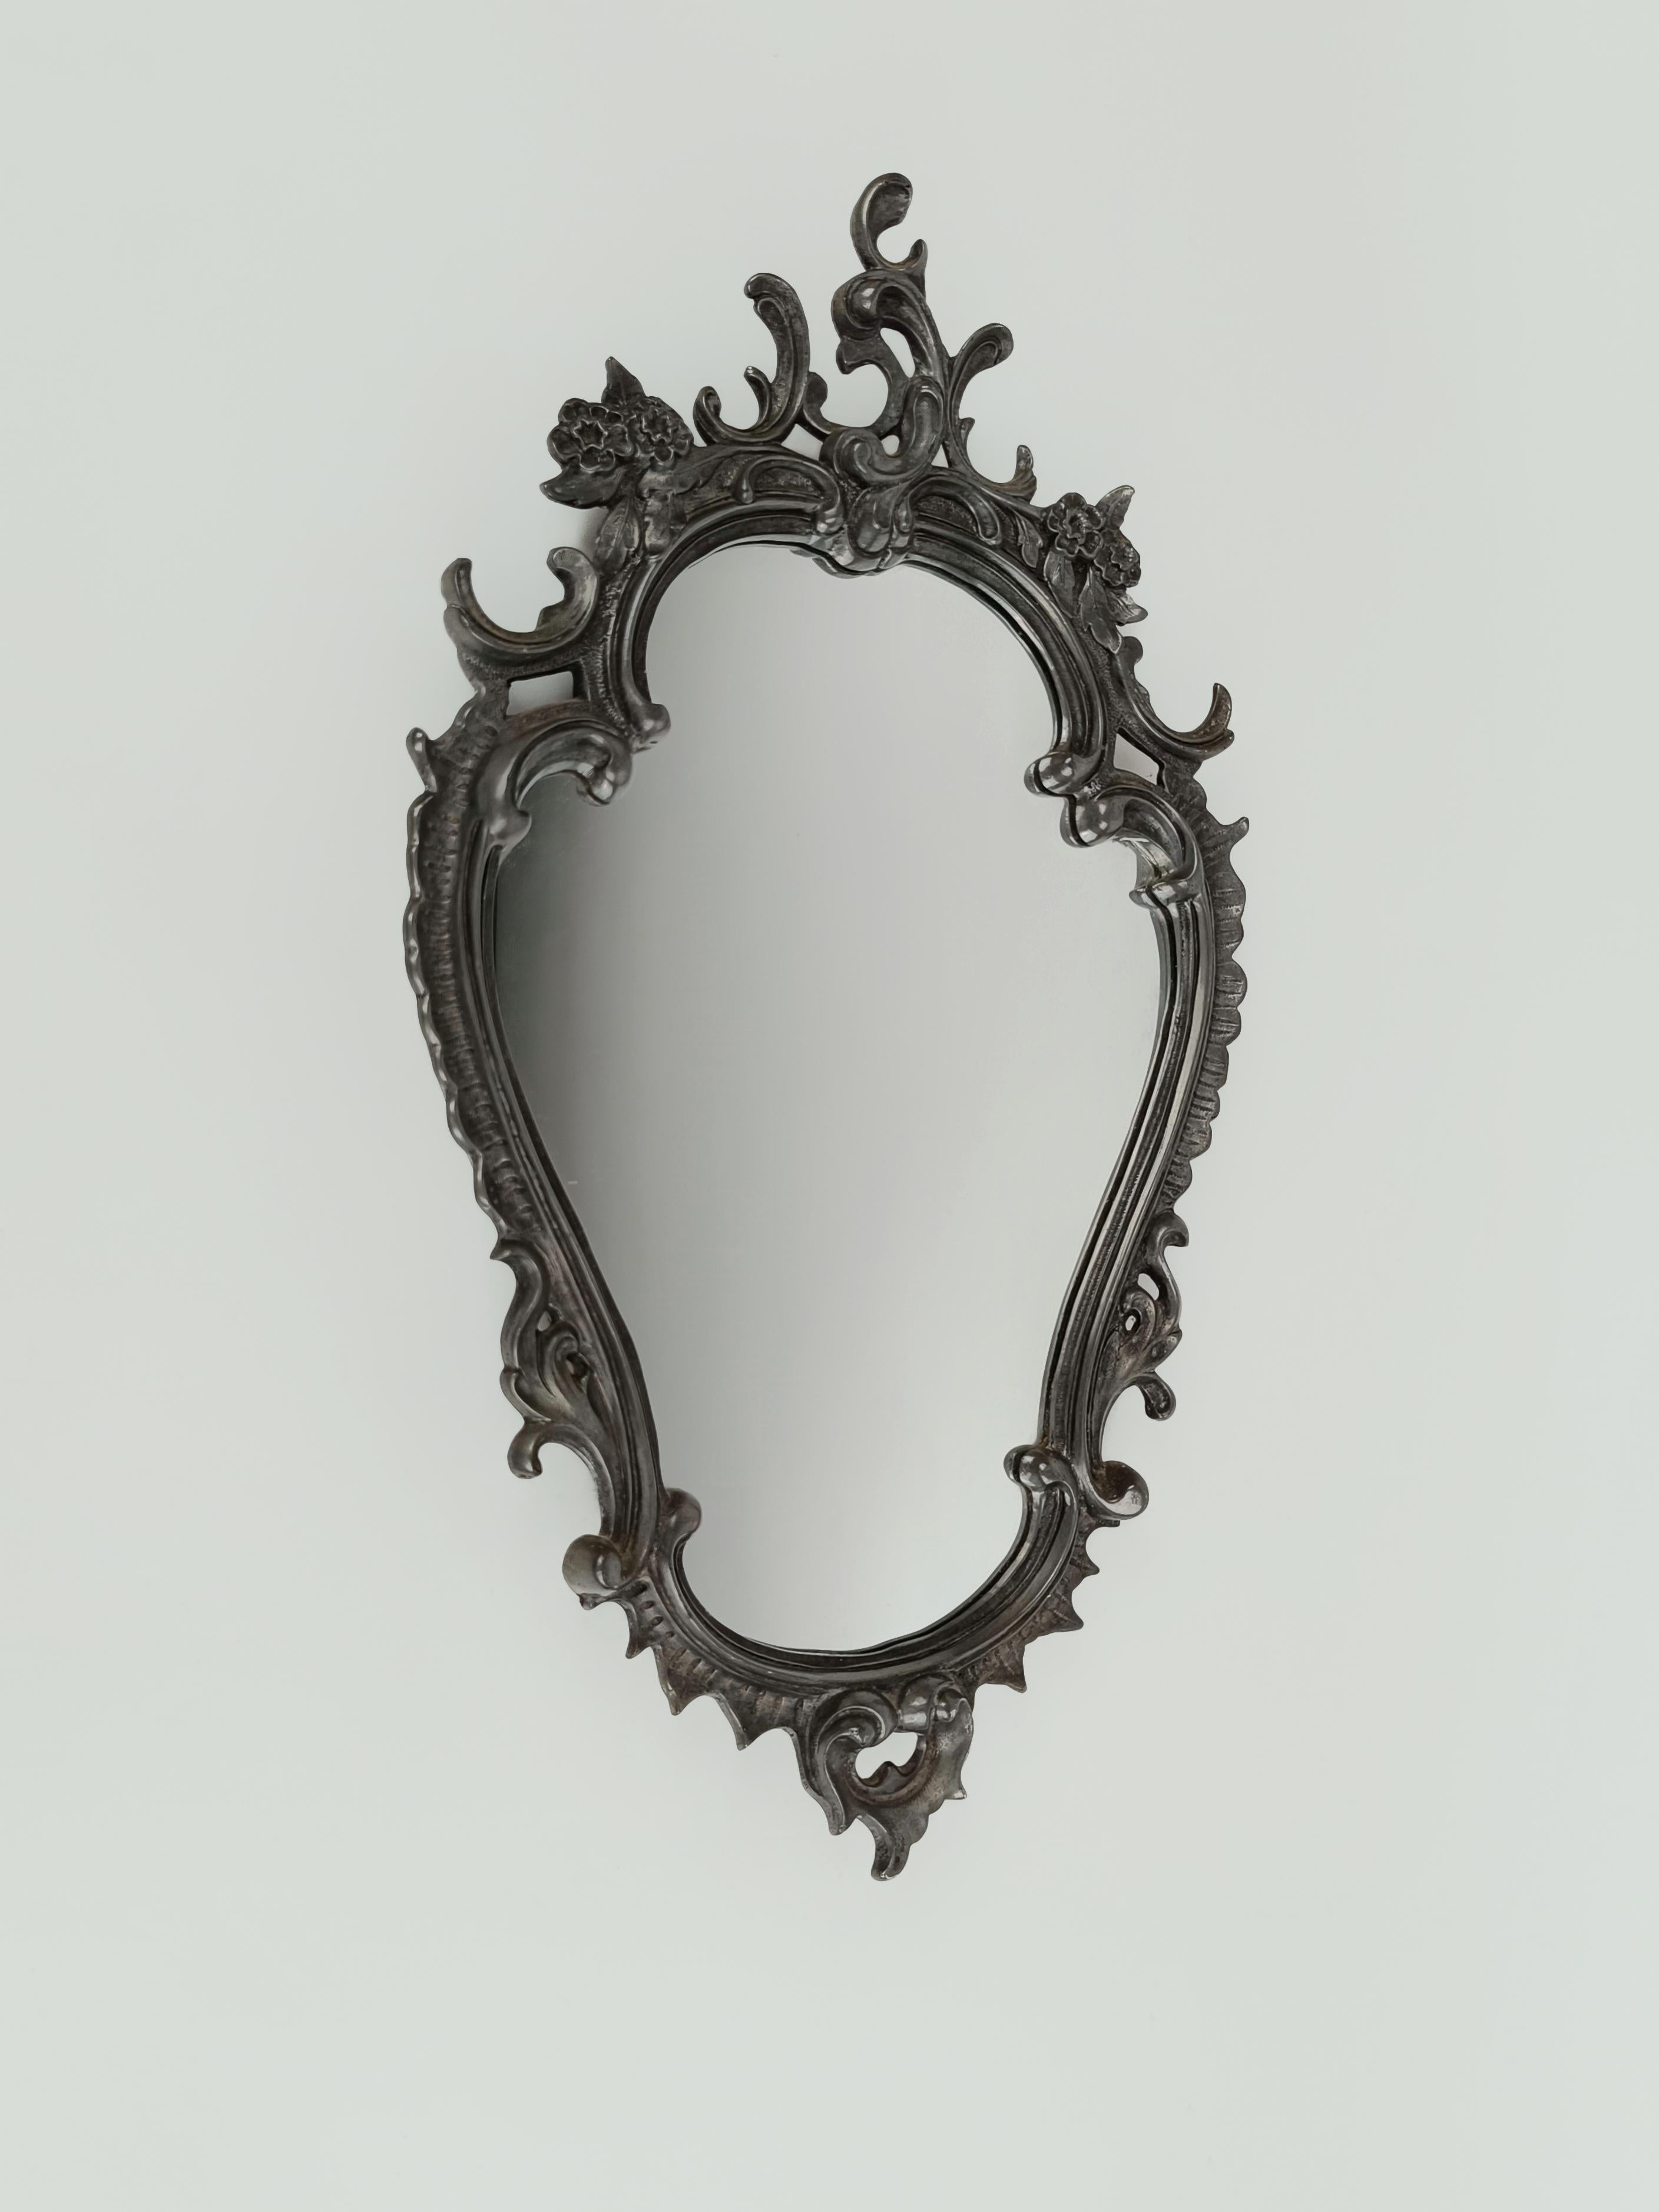 Vintage Mirror in Baroque Rococo style made in german silver For Sale 5